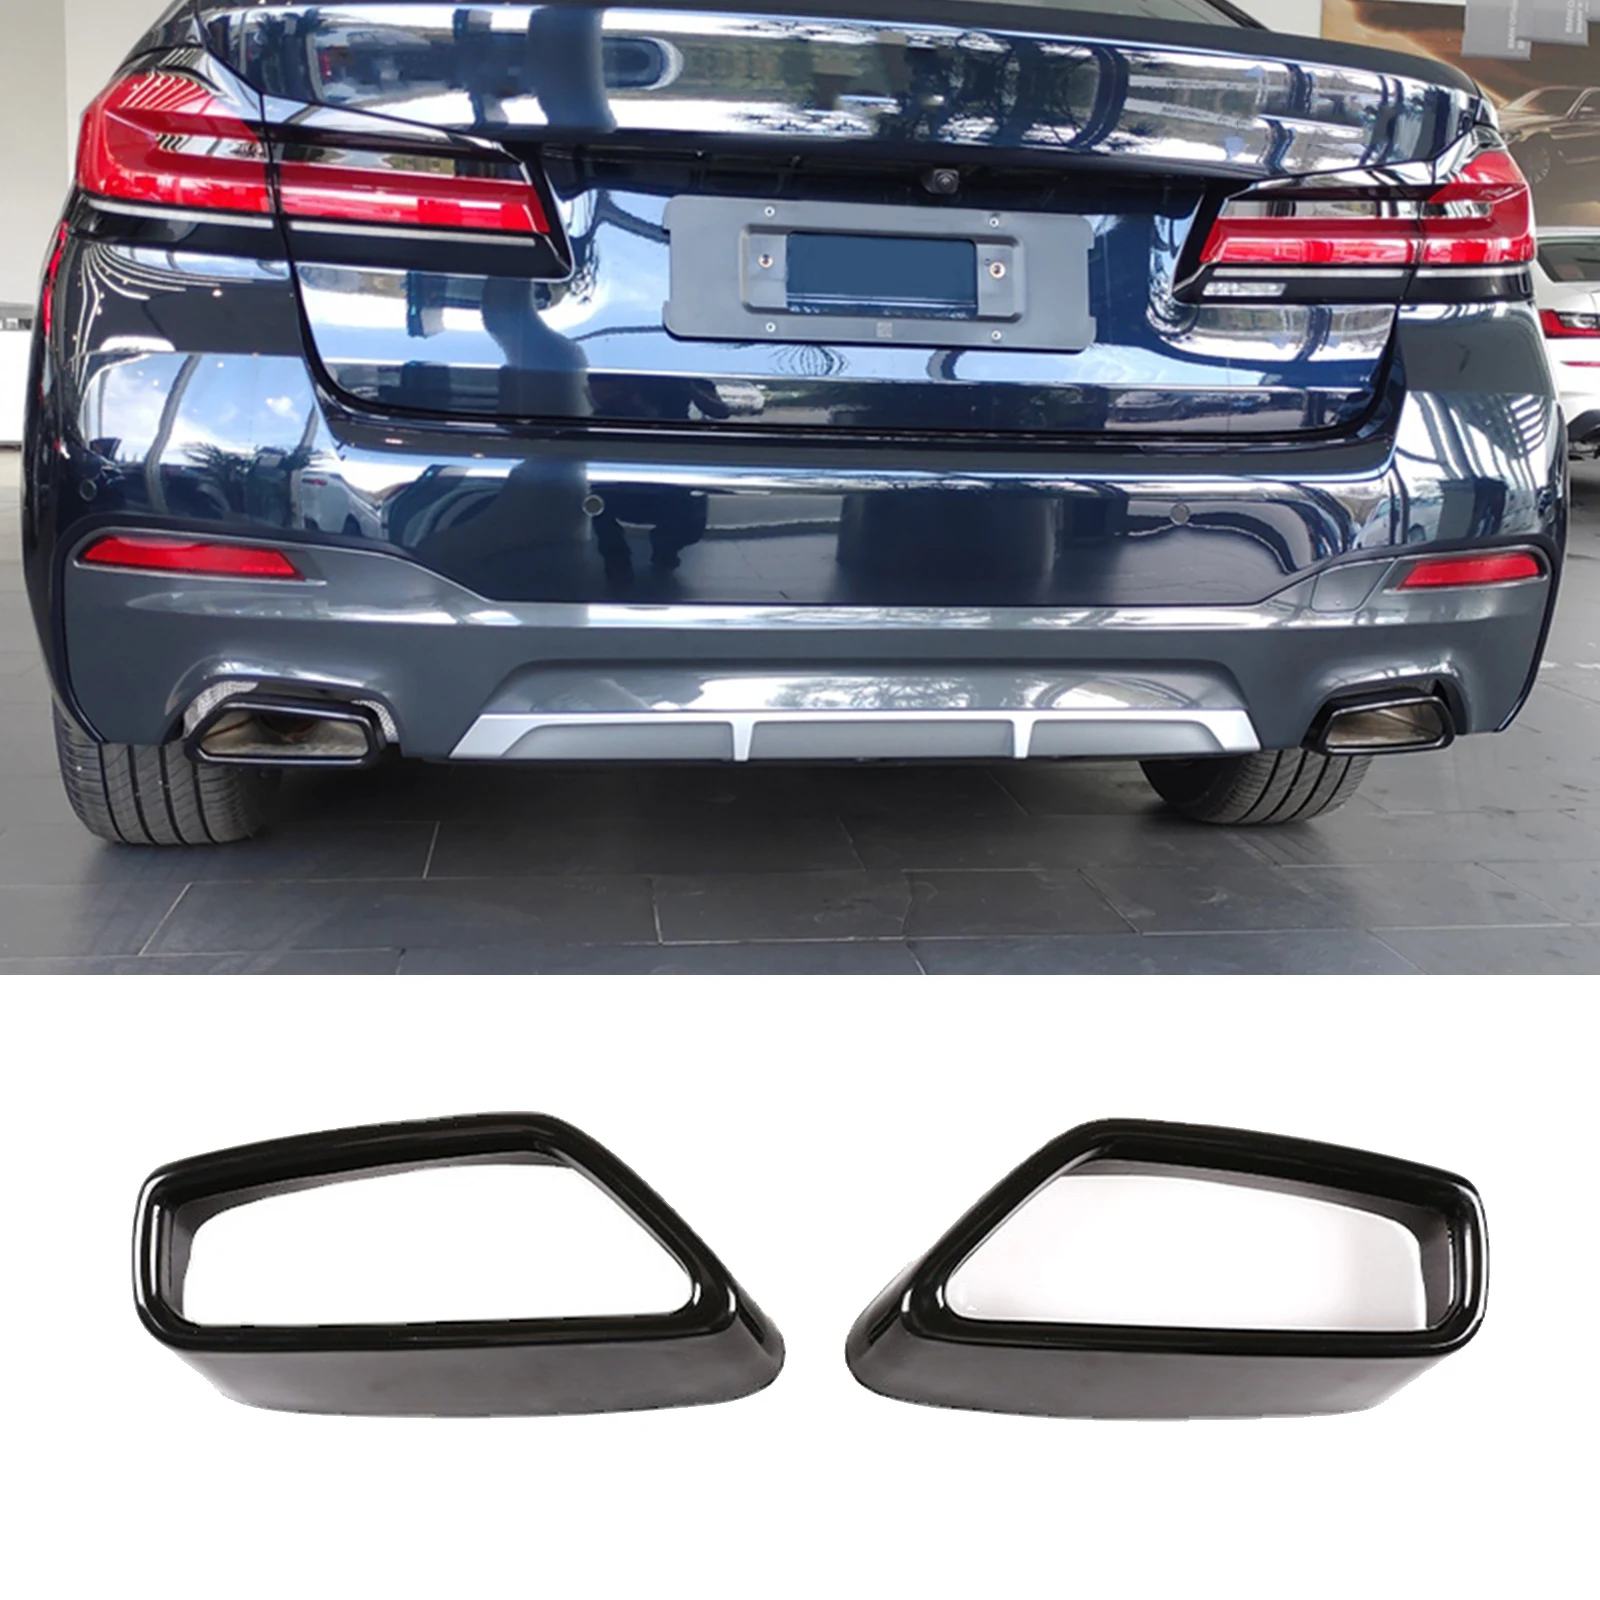 Rear Exhaust Muffler Pipe Cover Trim Tail Throat Frame Decoration fits for BMW 5 G30 G38